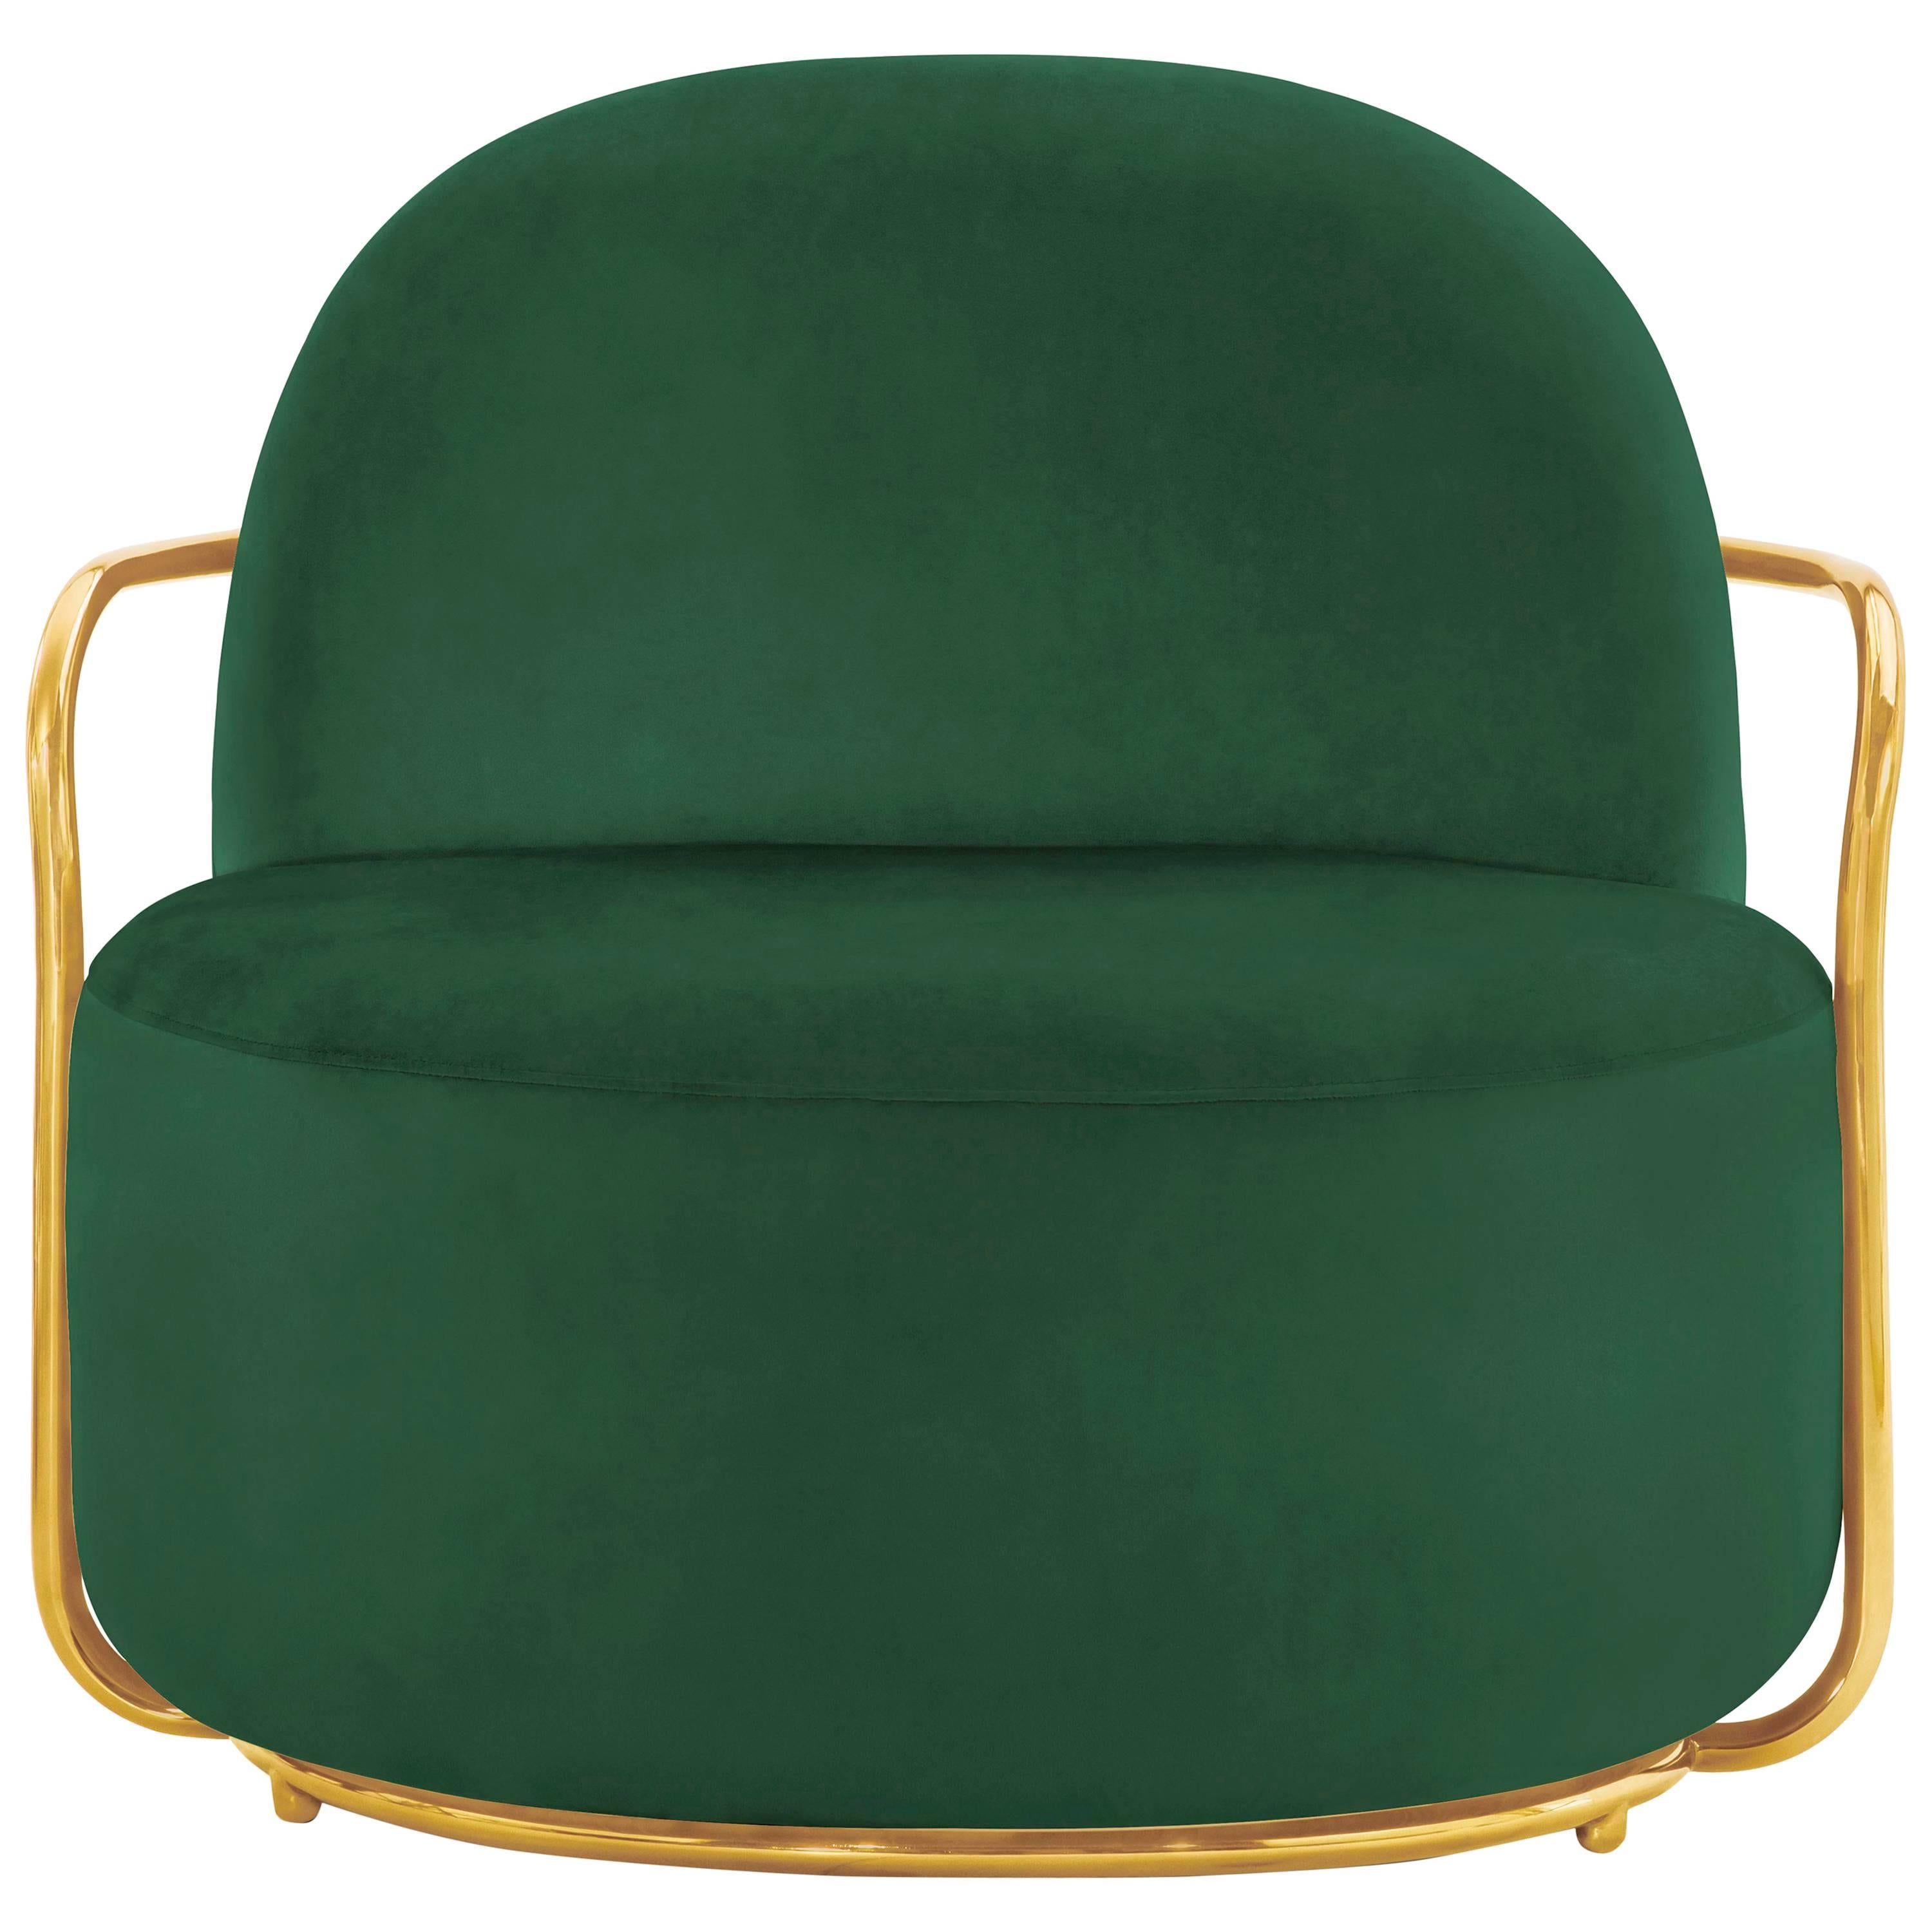 Orion Lounge Chair Green by Nika Zupanc for Scarlet Splendour For Sale